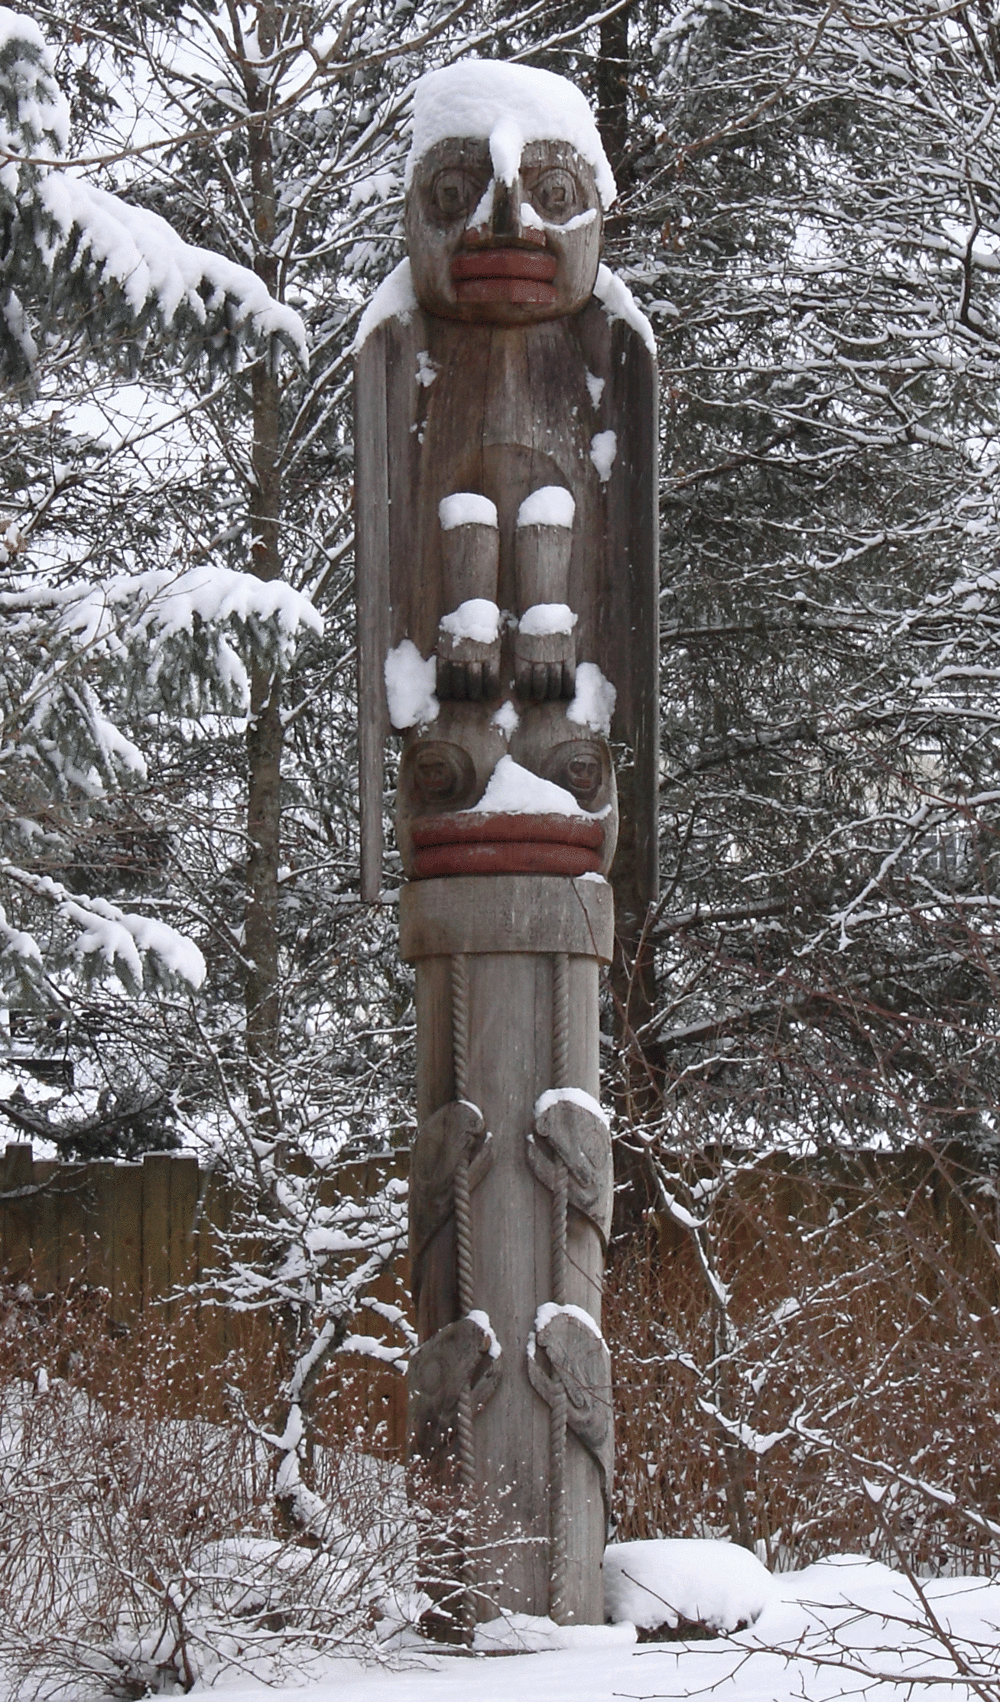 The One Legged Fisherman totem on a snowy day.